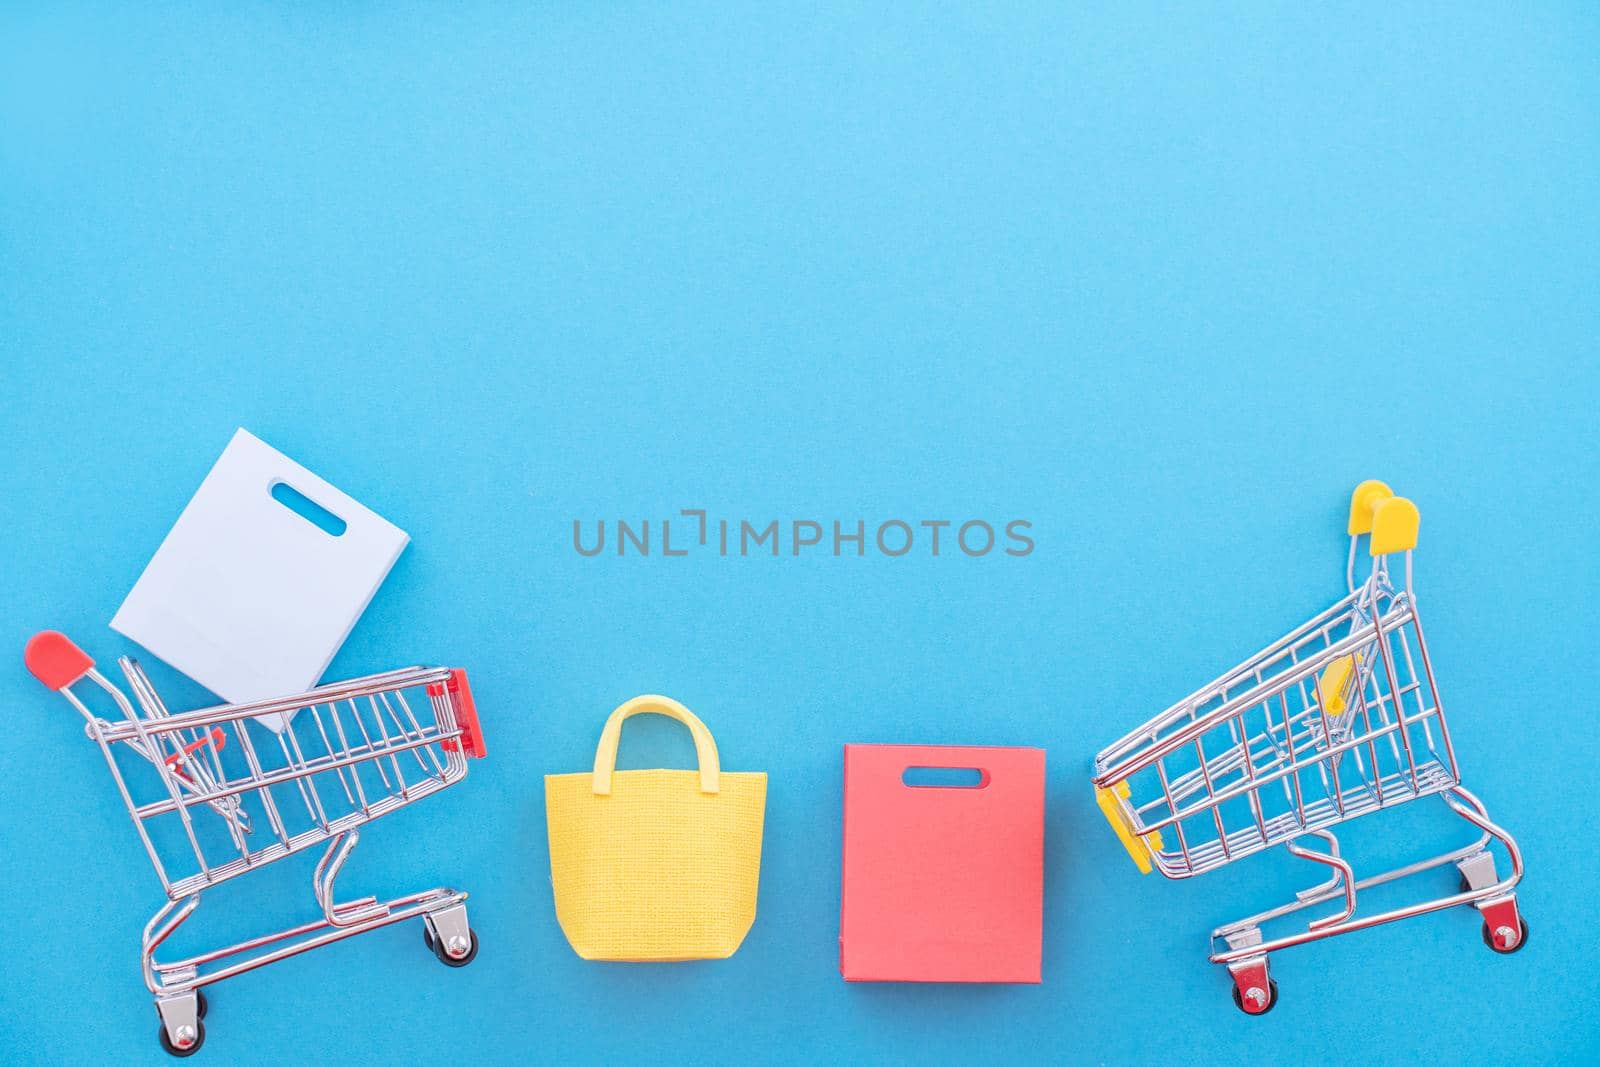 Abstract design element, annual sale, shopping season concept, mini yellow cart with colorful paper bag on pastel blue background, top view, flat lay